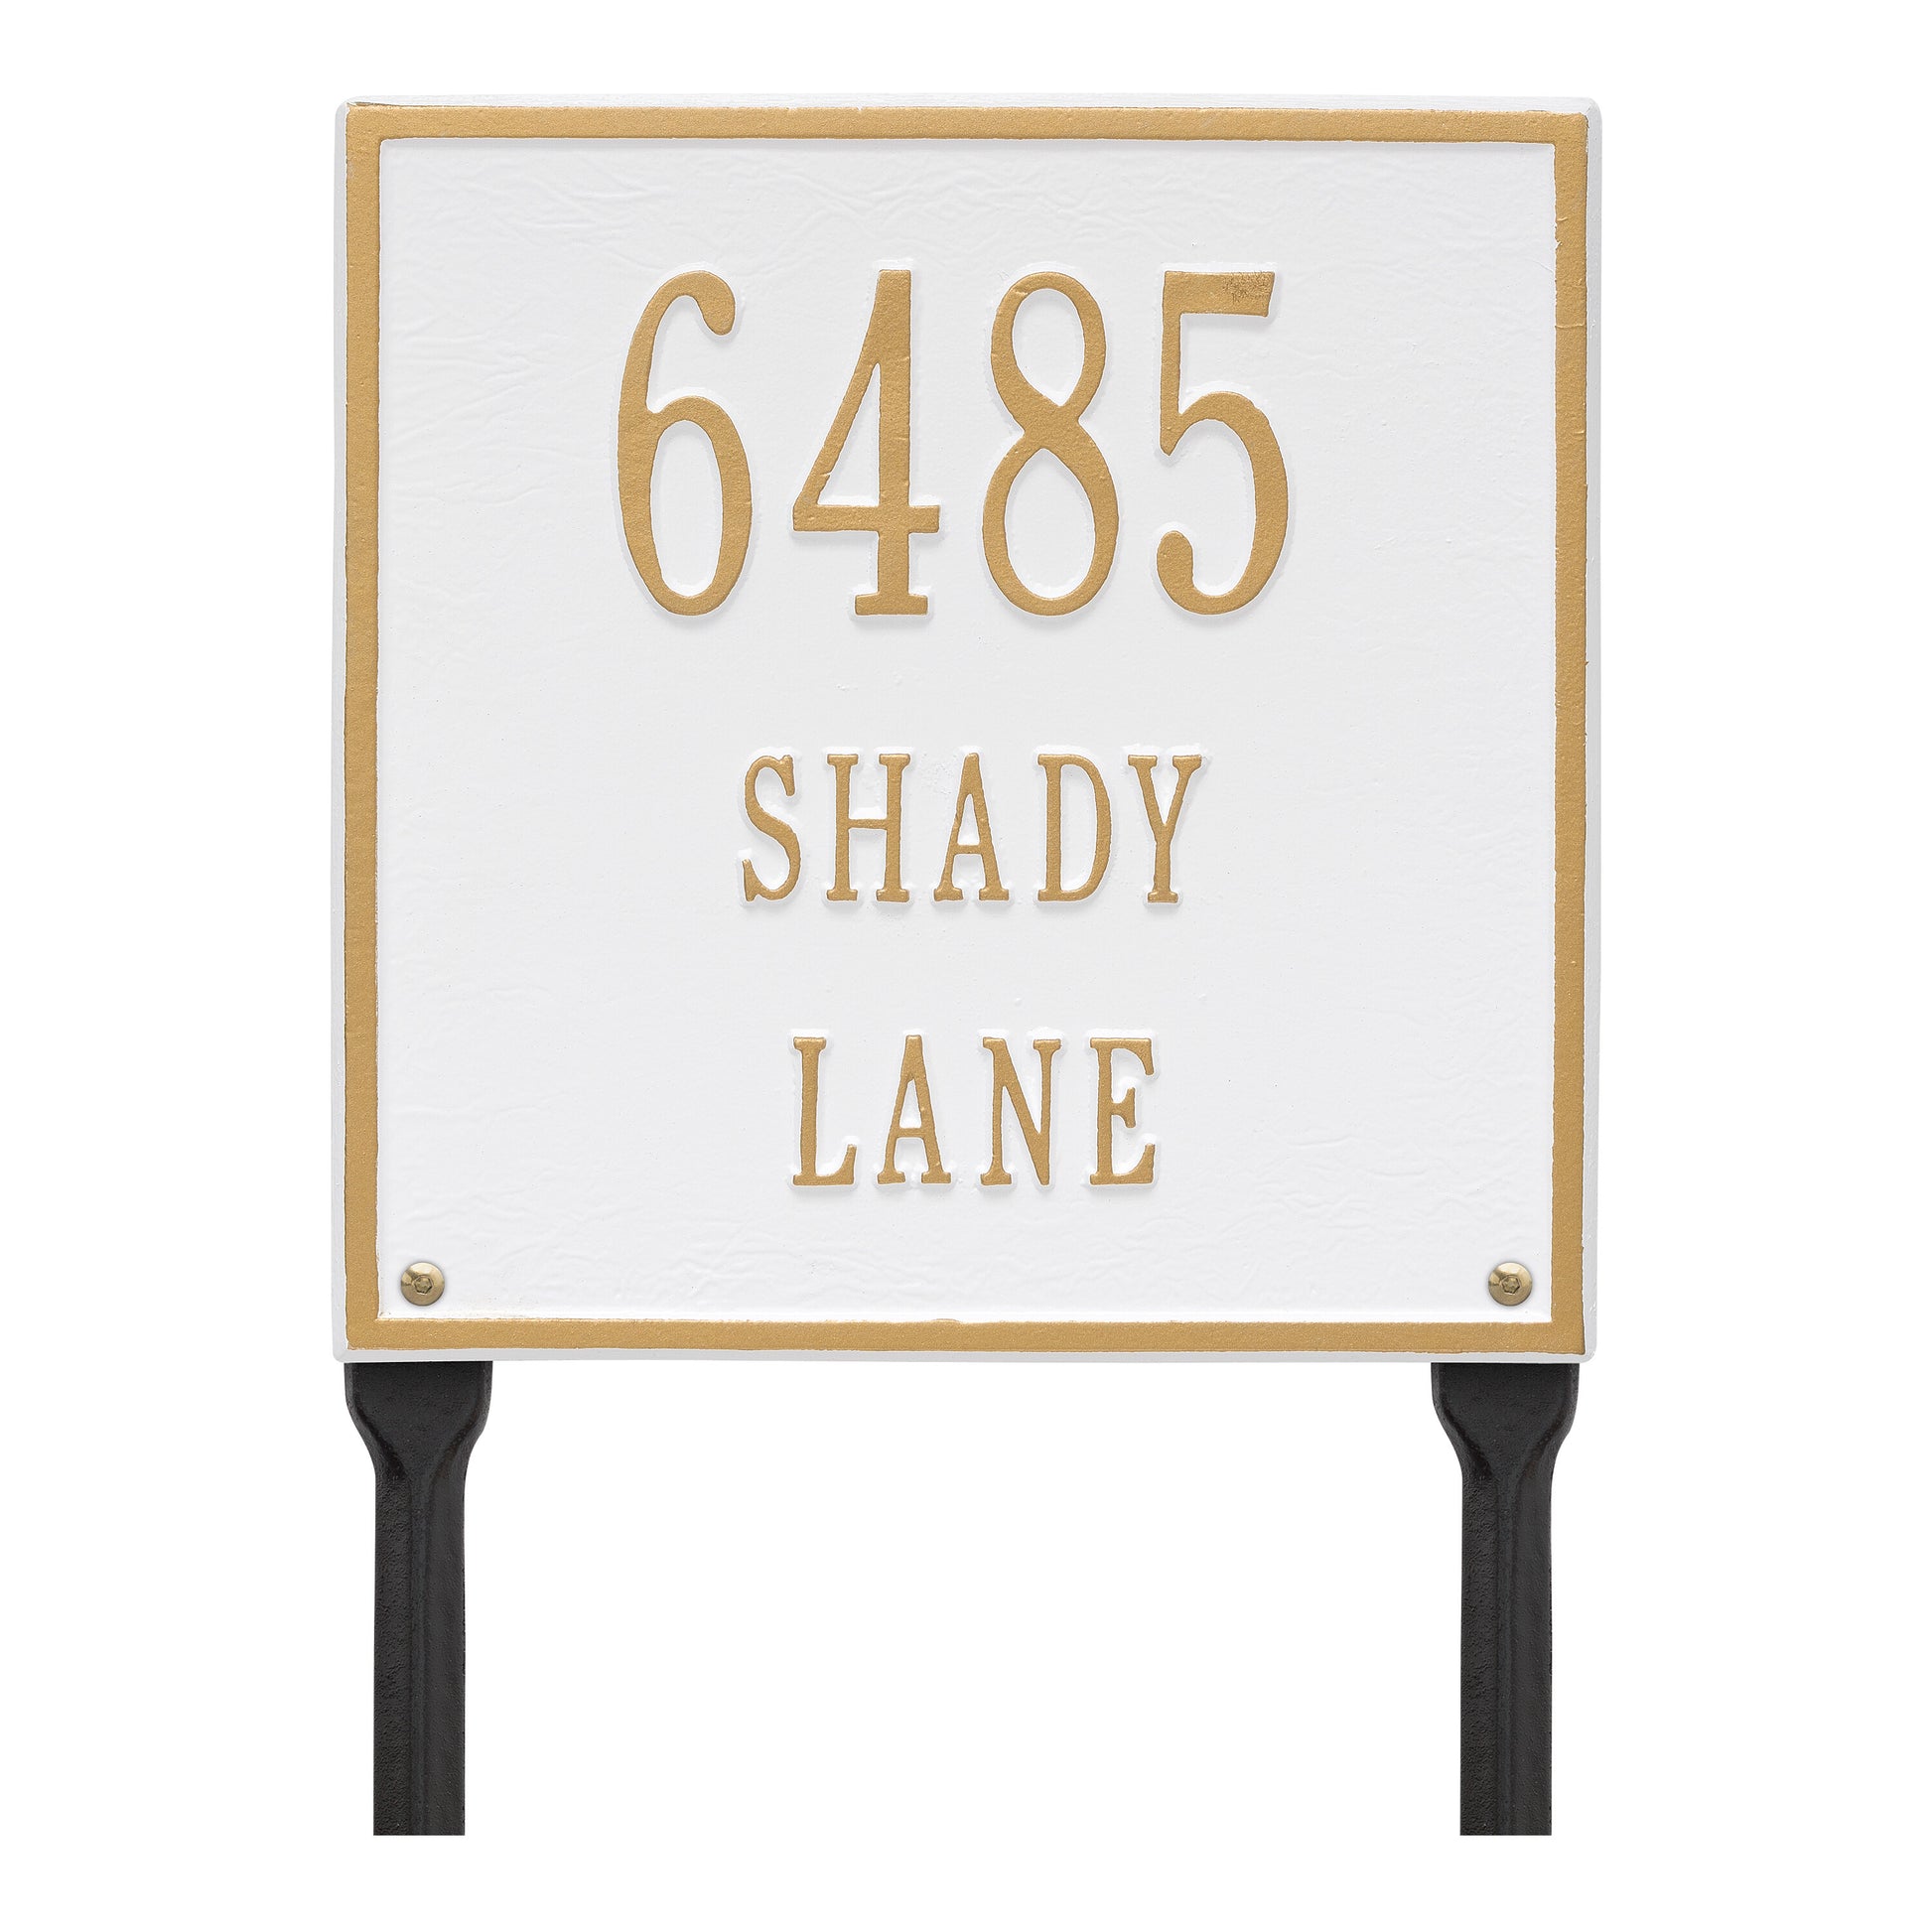 Whitehall Products Personalized Square Standard Lawn Plaque Three Line 